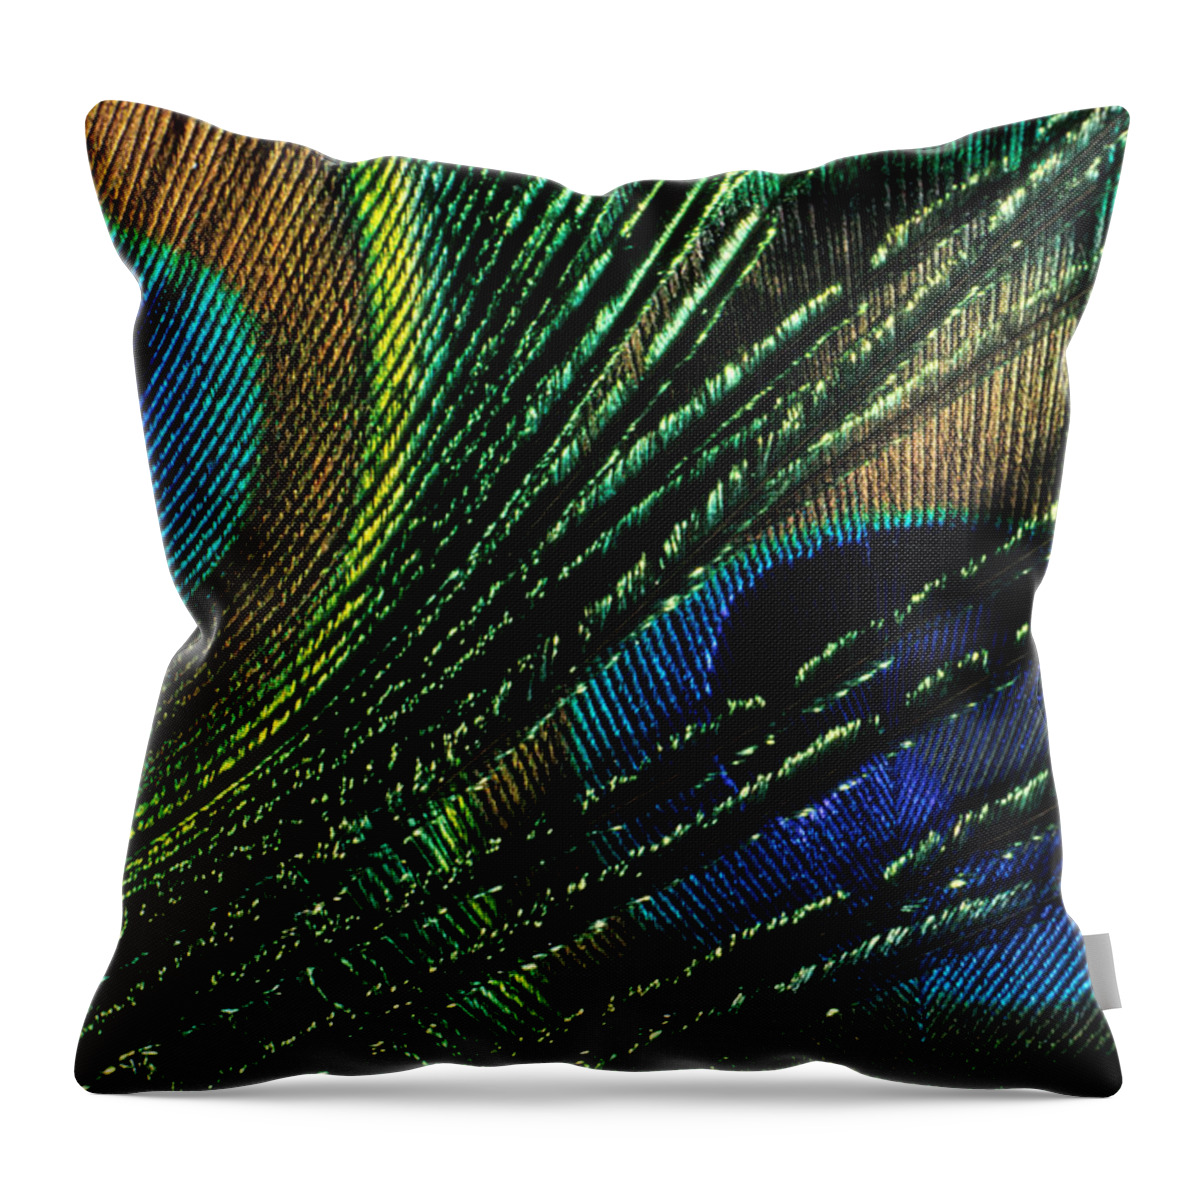 Peacock Throw Pillow featuring the photograph Peacock Eyes by Jerry McElroy